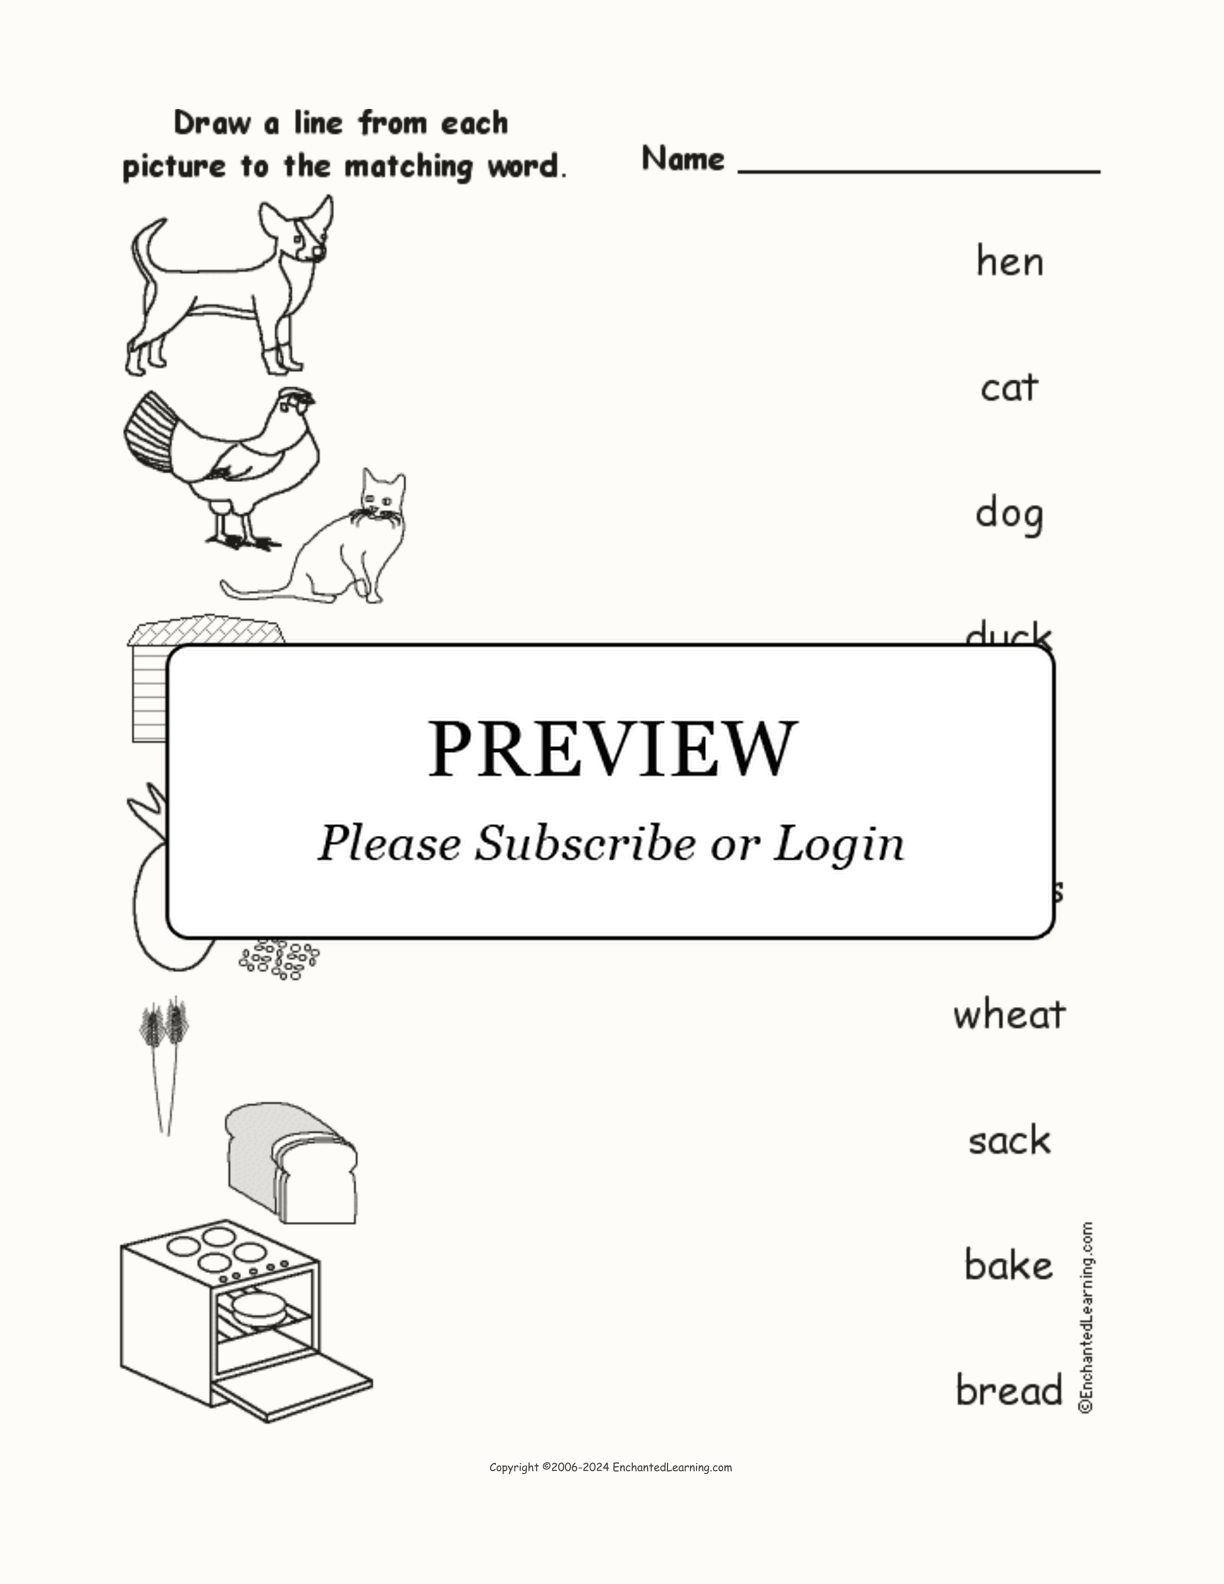 Match 'The Little Red Hen' Words to the Pictures interactive worksheet page 1